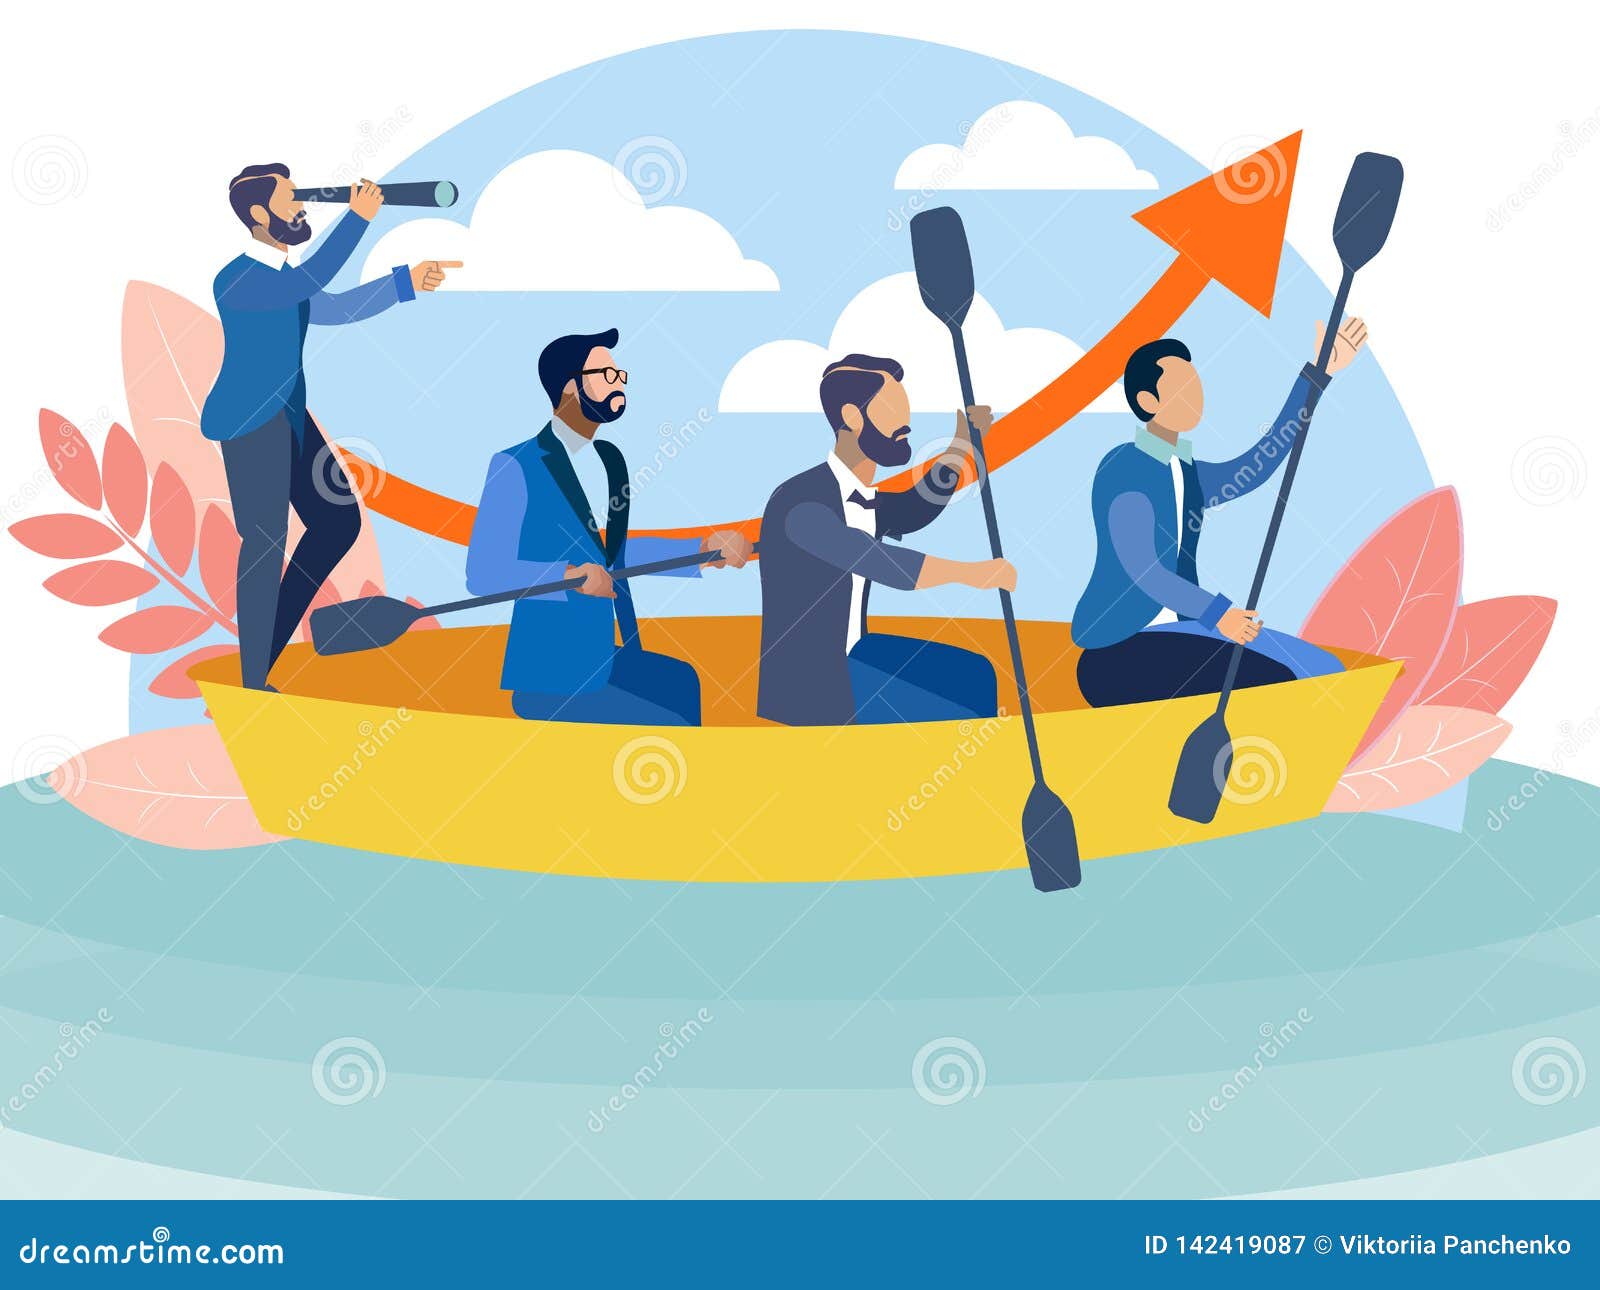 office staff sailing in the same boat to the goal. in minimalist style cartoon flat